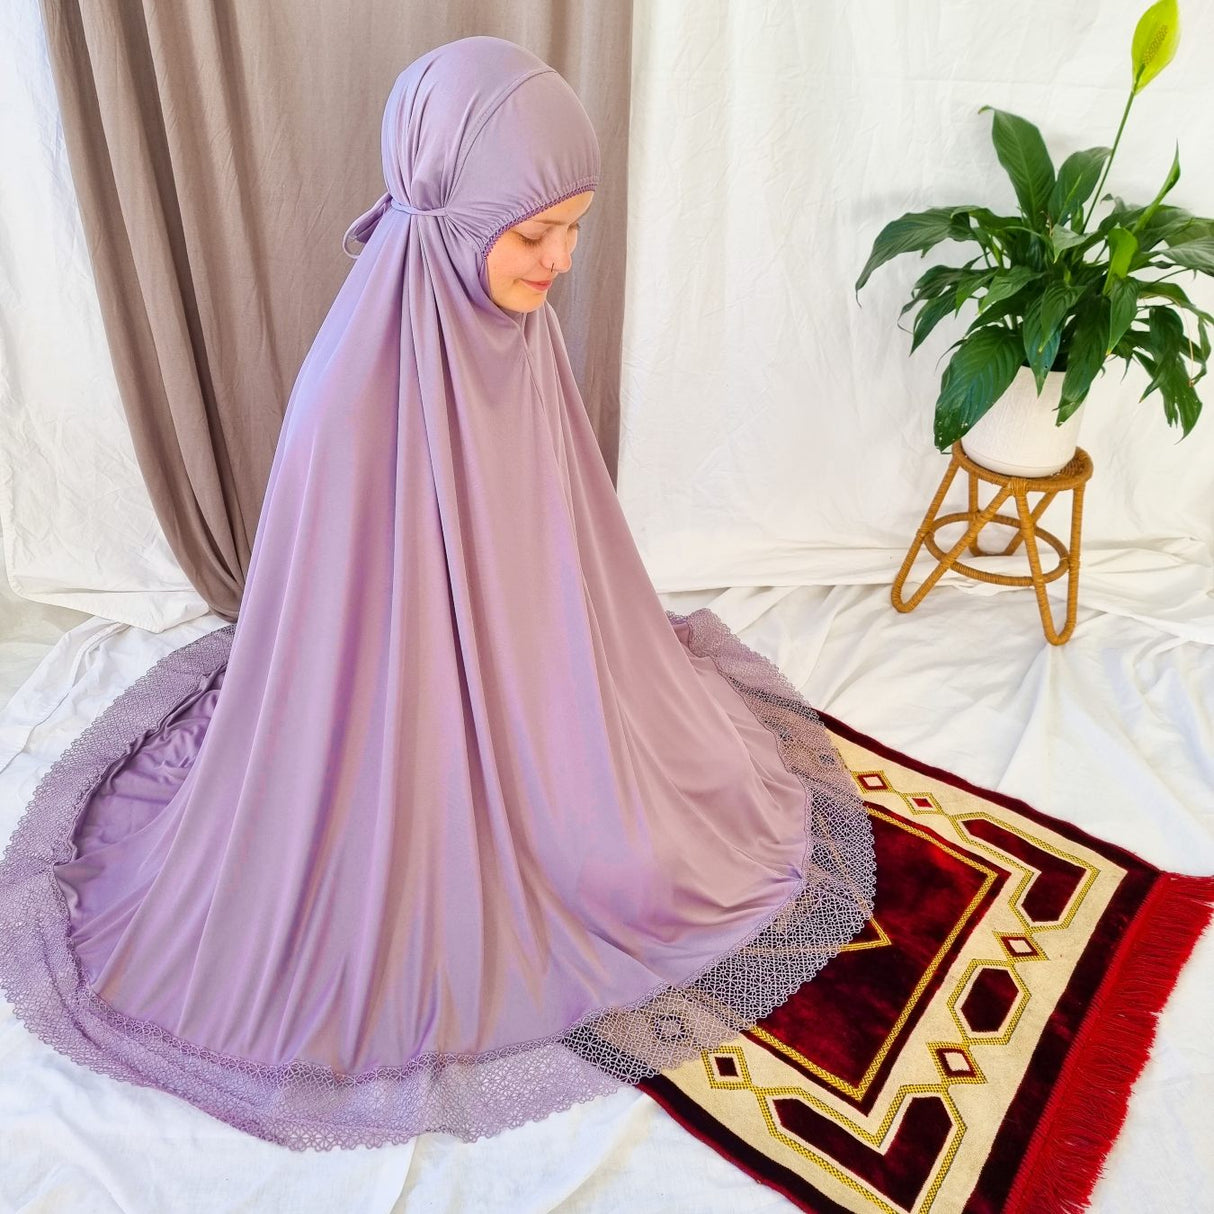 Elegant Prayer Clothes for Women with Lace - Purple